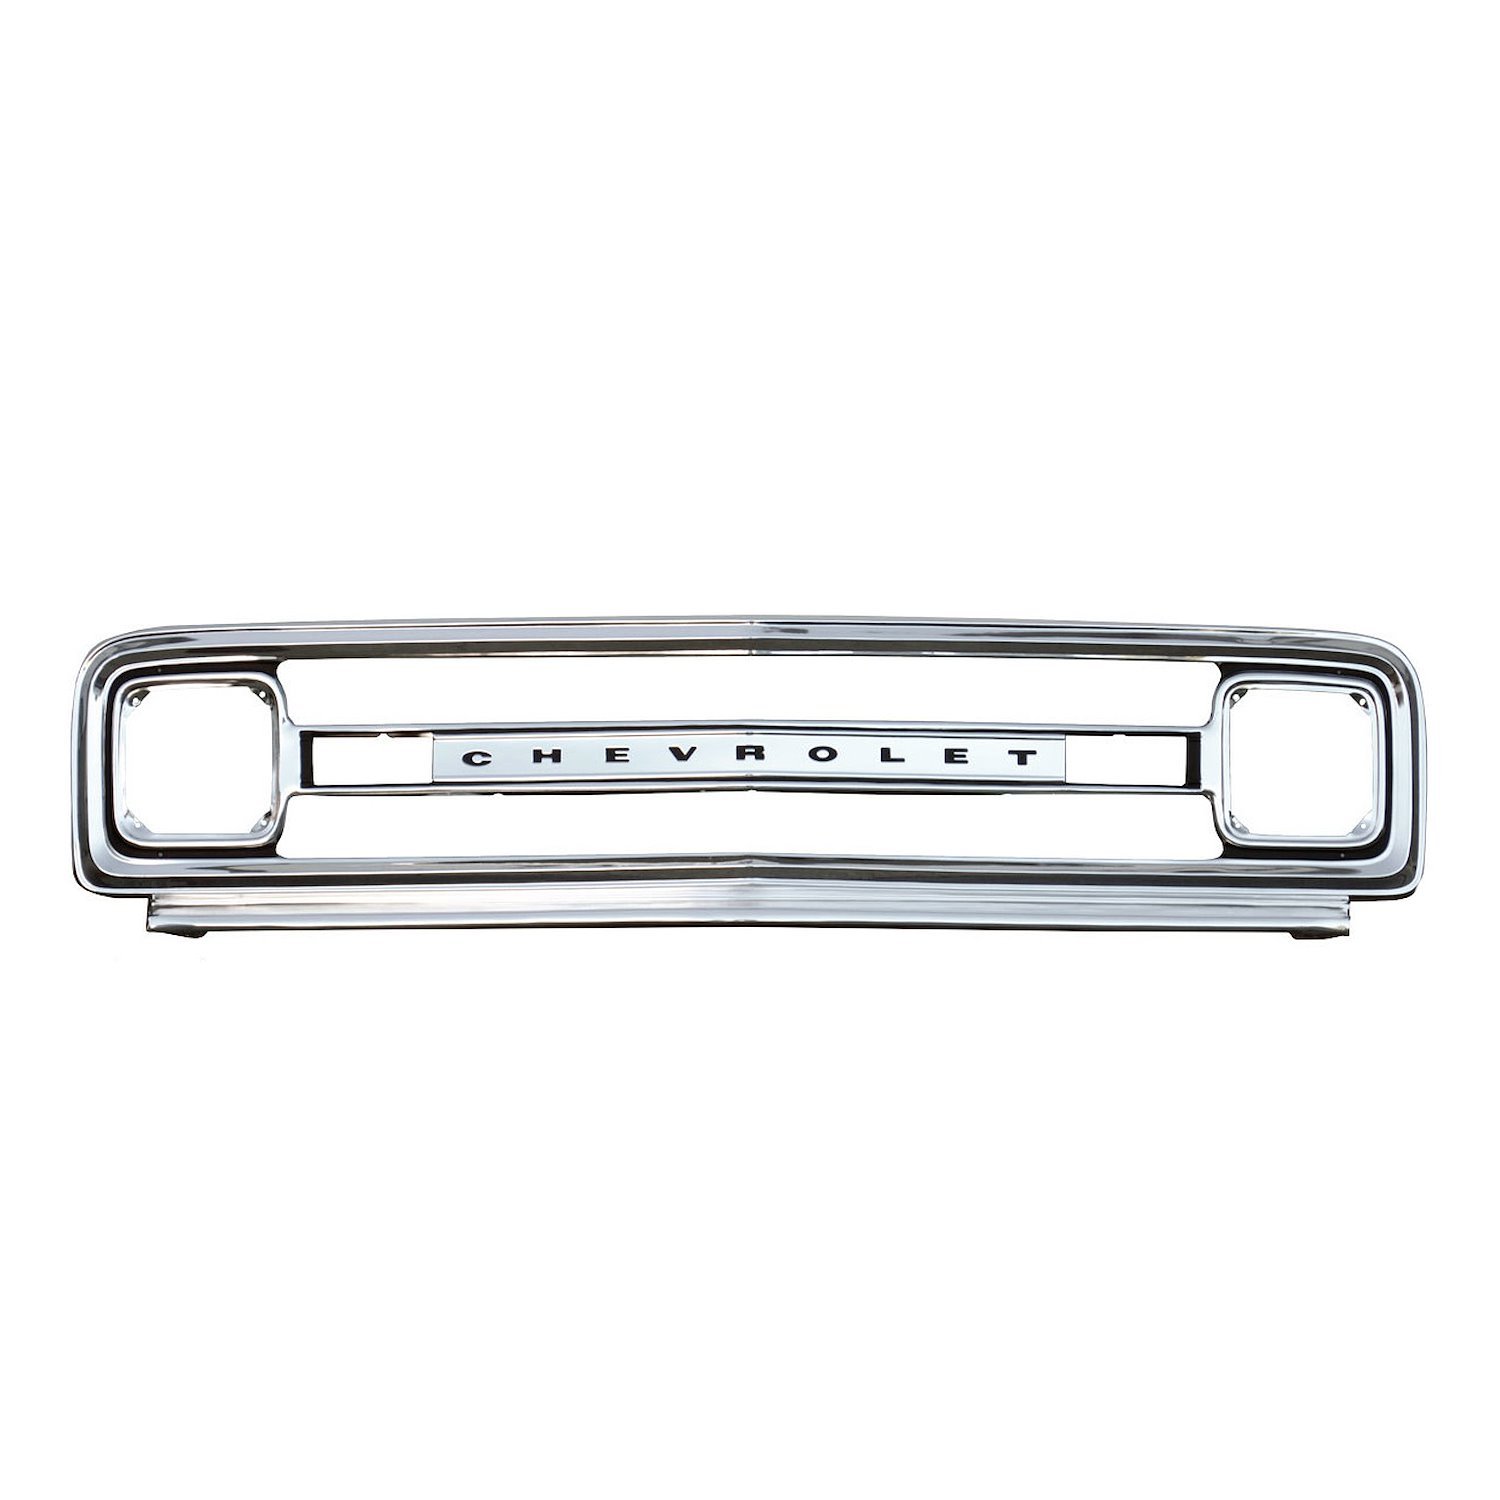 OE Reproduction Grille 1969-1970 GM C/K Series